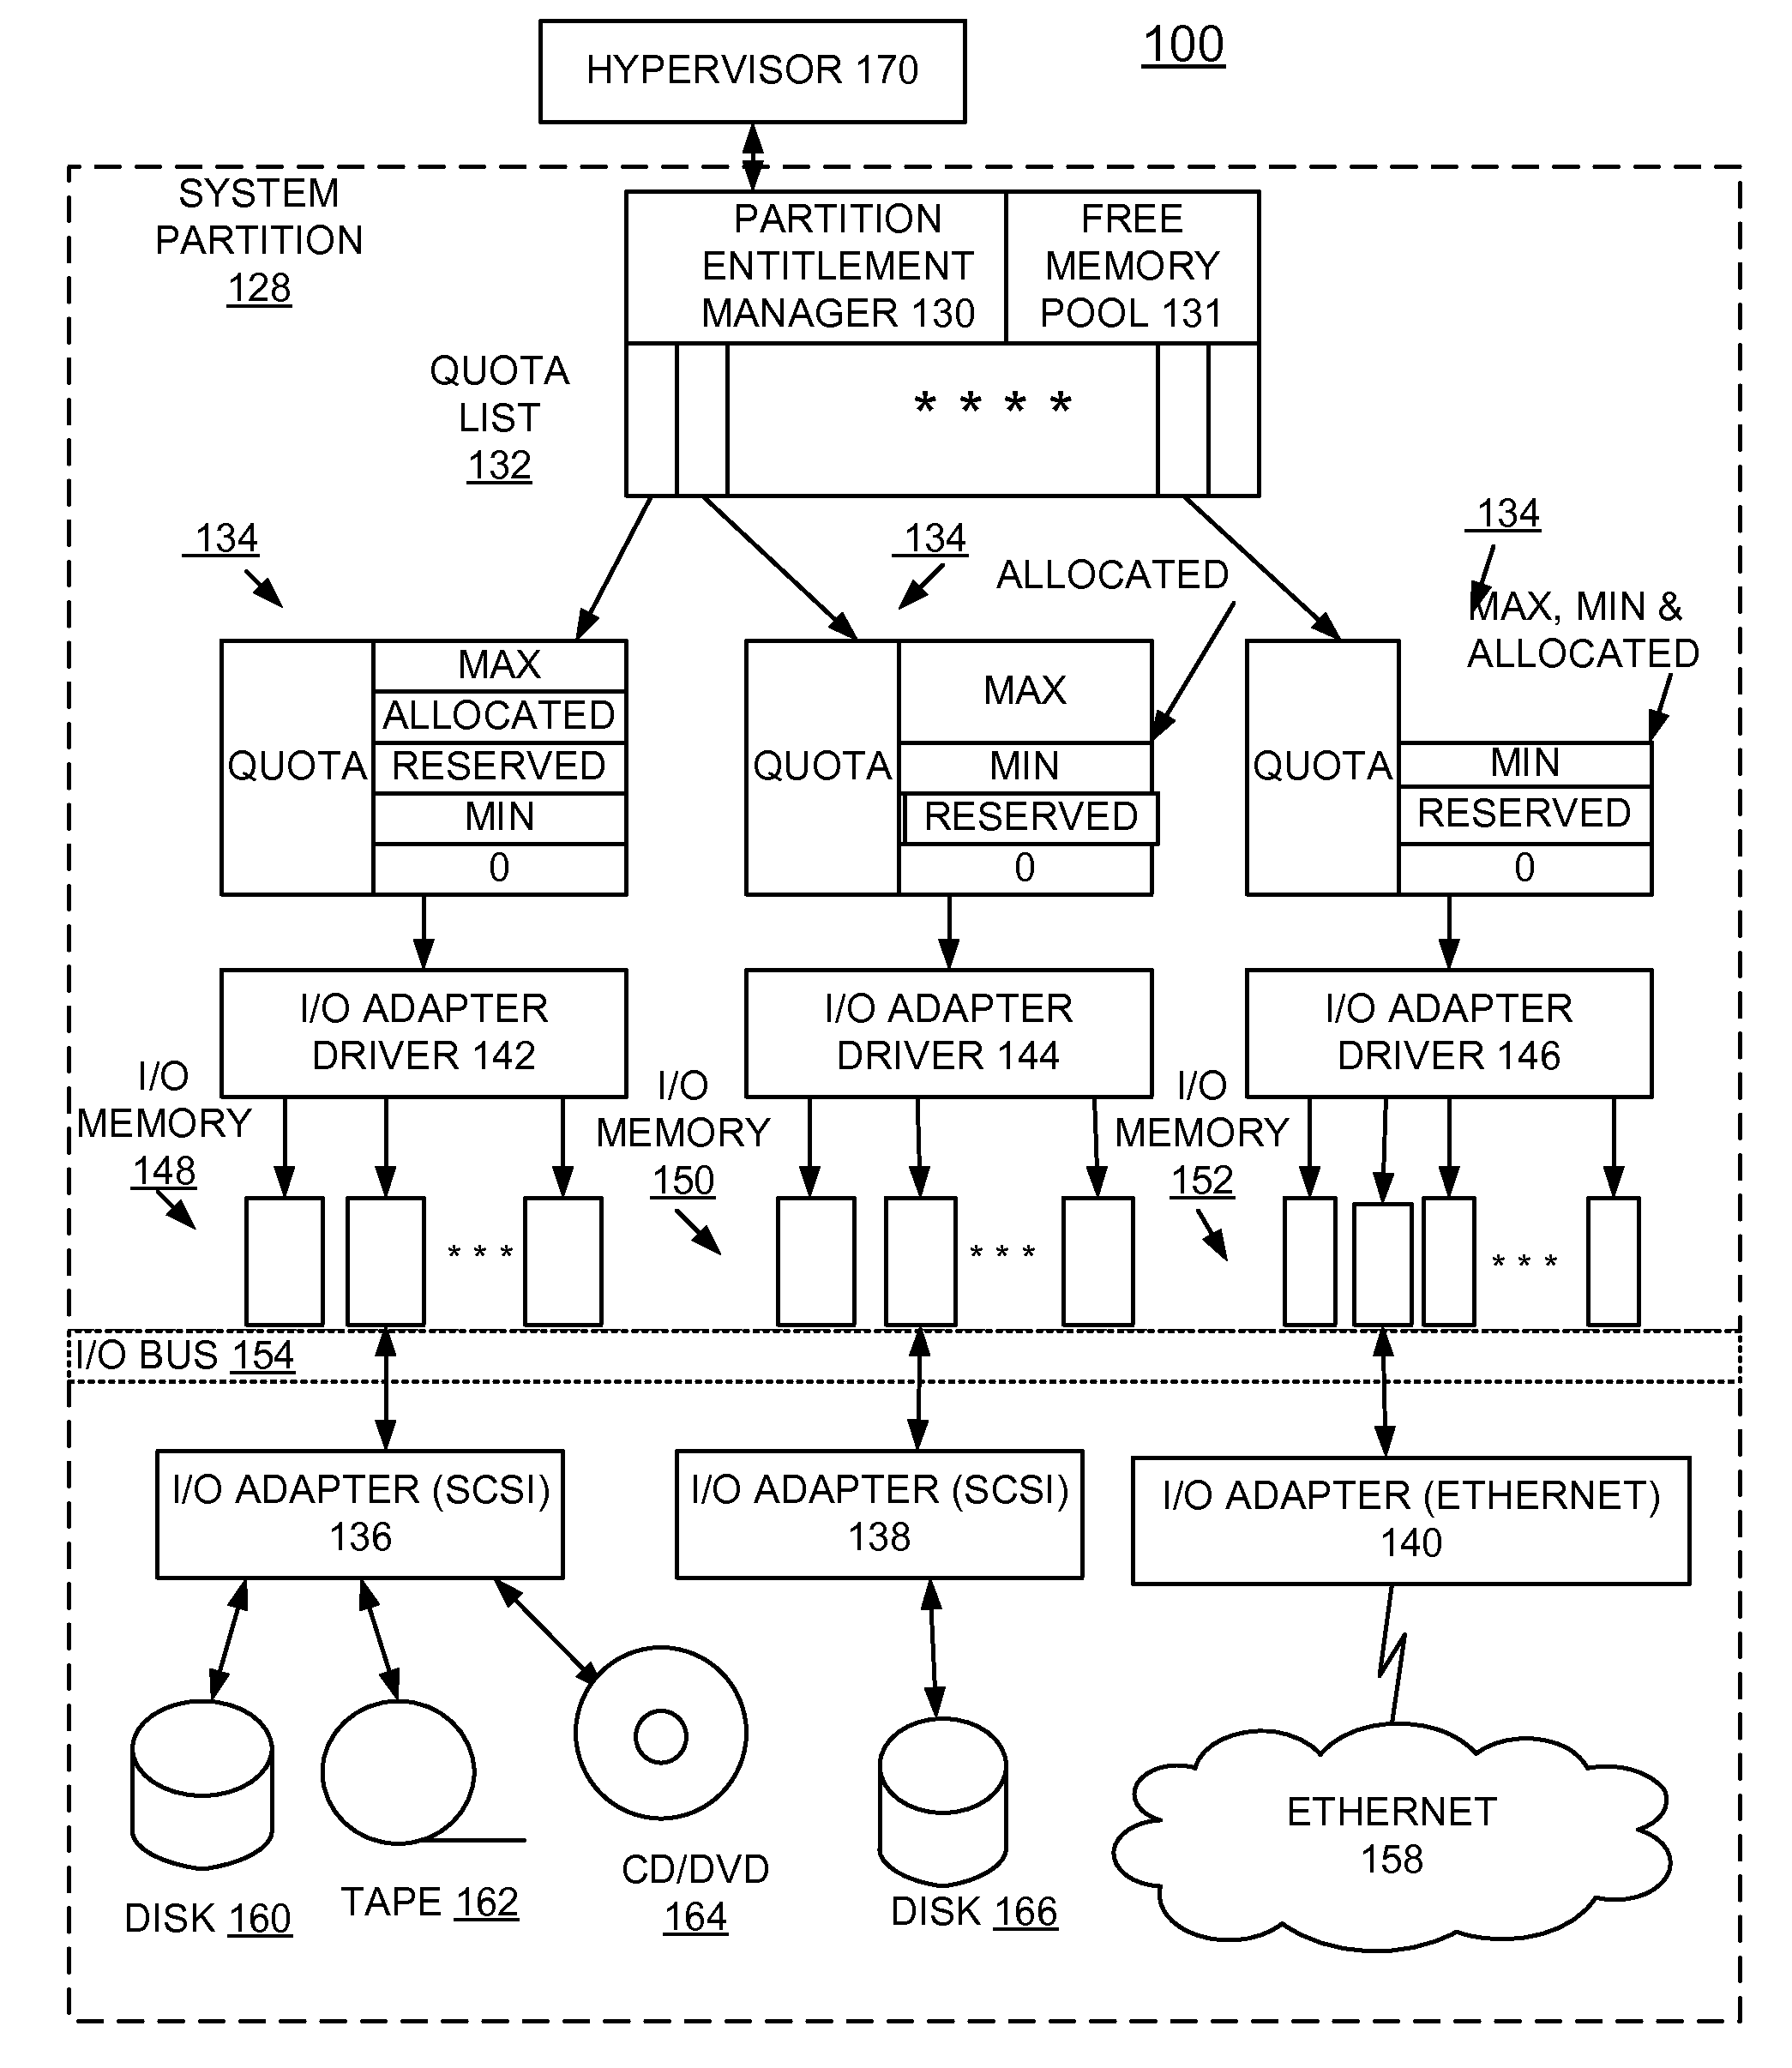 Dynamically allocating limited system memory for DMA among multiple adapters